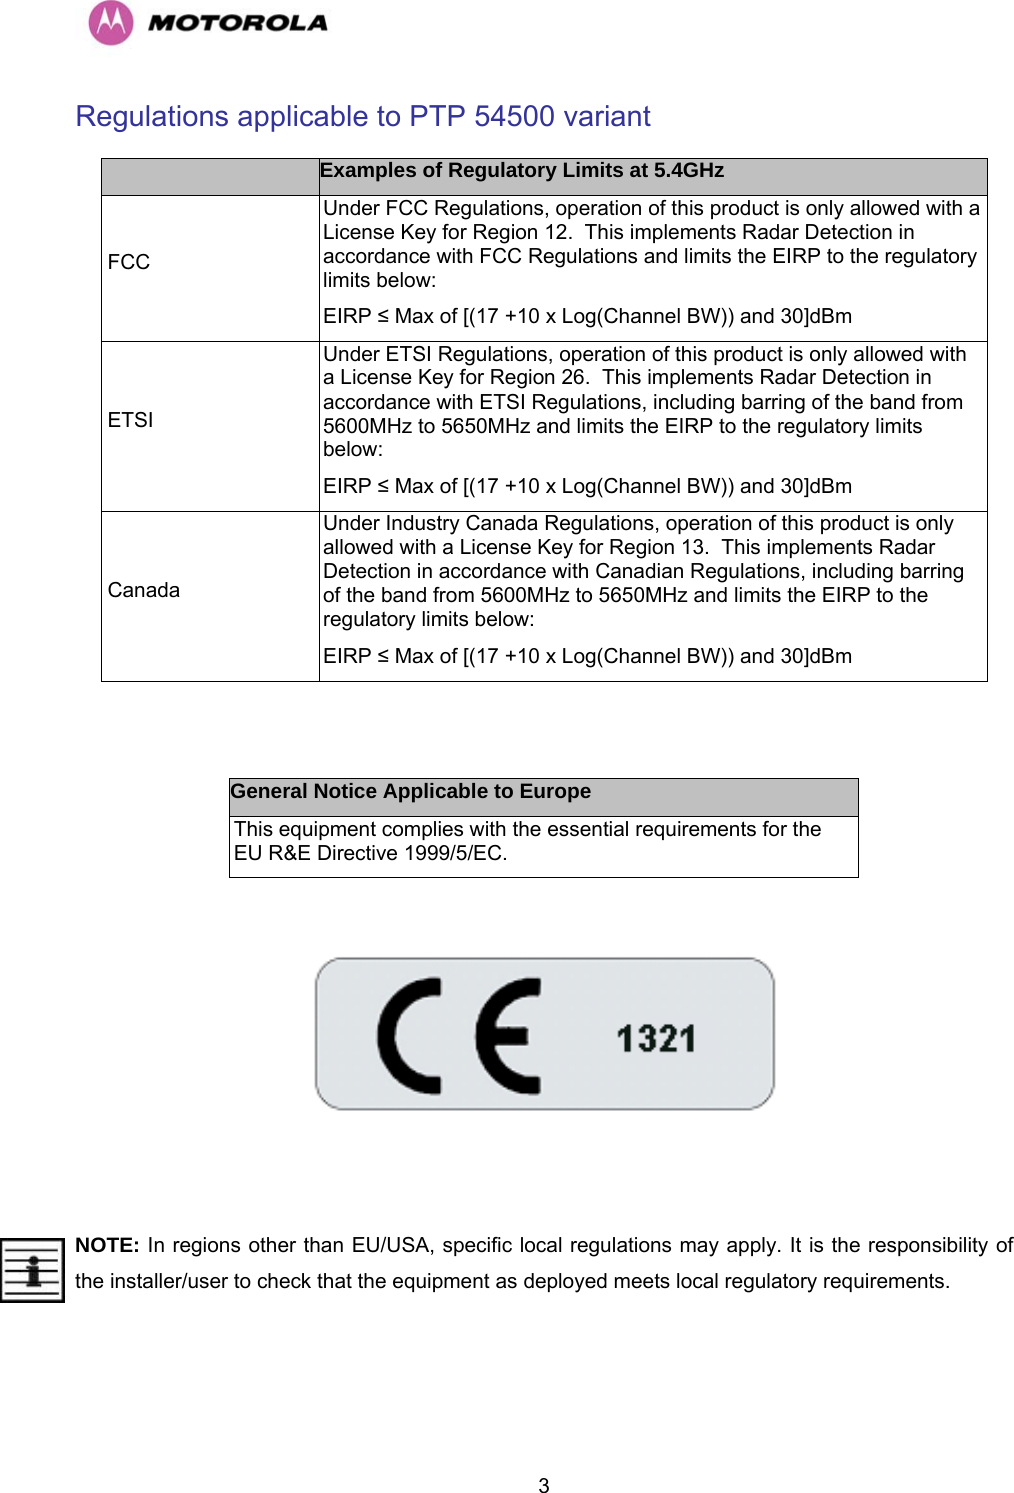   3Regulations applicable to PTP 54500 variant  Examples of Regulatory Limits at 5.4GHz  FCC Under FCC Regulations, operation of this product is only allowed with a License Key for Region 12.  This implements Radar Detection in accordance with FCC Regulations and limits the EIRP to the regulatory limits below: EIRP ≤ Max of [(17 +10 x Log(Channel BW)) and 30]dBm  ETSI Under ETSI Regulations, operation of this product is only allowed with a License Key for Region 26.  This implements Radar Detection in accordance with ETSI Regulations, including barring of the band from 5600MHz to 5650MHz and limits the EIRP to the regulatory limits below: EIRP ≤ Max of [(17 +10 x Log(Channel BW)) and 30]dBm  Canada Under Industry Canada Regulations, operation of this product is only allowed with a License Key for Region 13.  This implements Radar Detection in accordance with Canadian Regulations, including barring of the band from 5600MHz to 5650MHz and limits the EIRP to the regulatory limits below: EIRP ≤ Max of [(17 +10 x Log(Channel BW)) and 30]dBm   General Notice Applicable to Europe This equipment complies with the essential requirements for the EU R&amp;E Directive 1999/5/EC.    NOTE: In regions other than EU/USA, specific local regulations may apply. It is the responsibility of the installer/user to check that the equipment as deployed meets local regulatory requirements. 